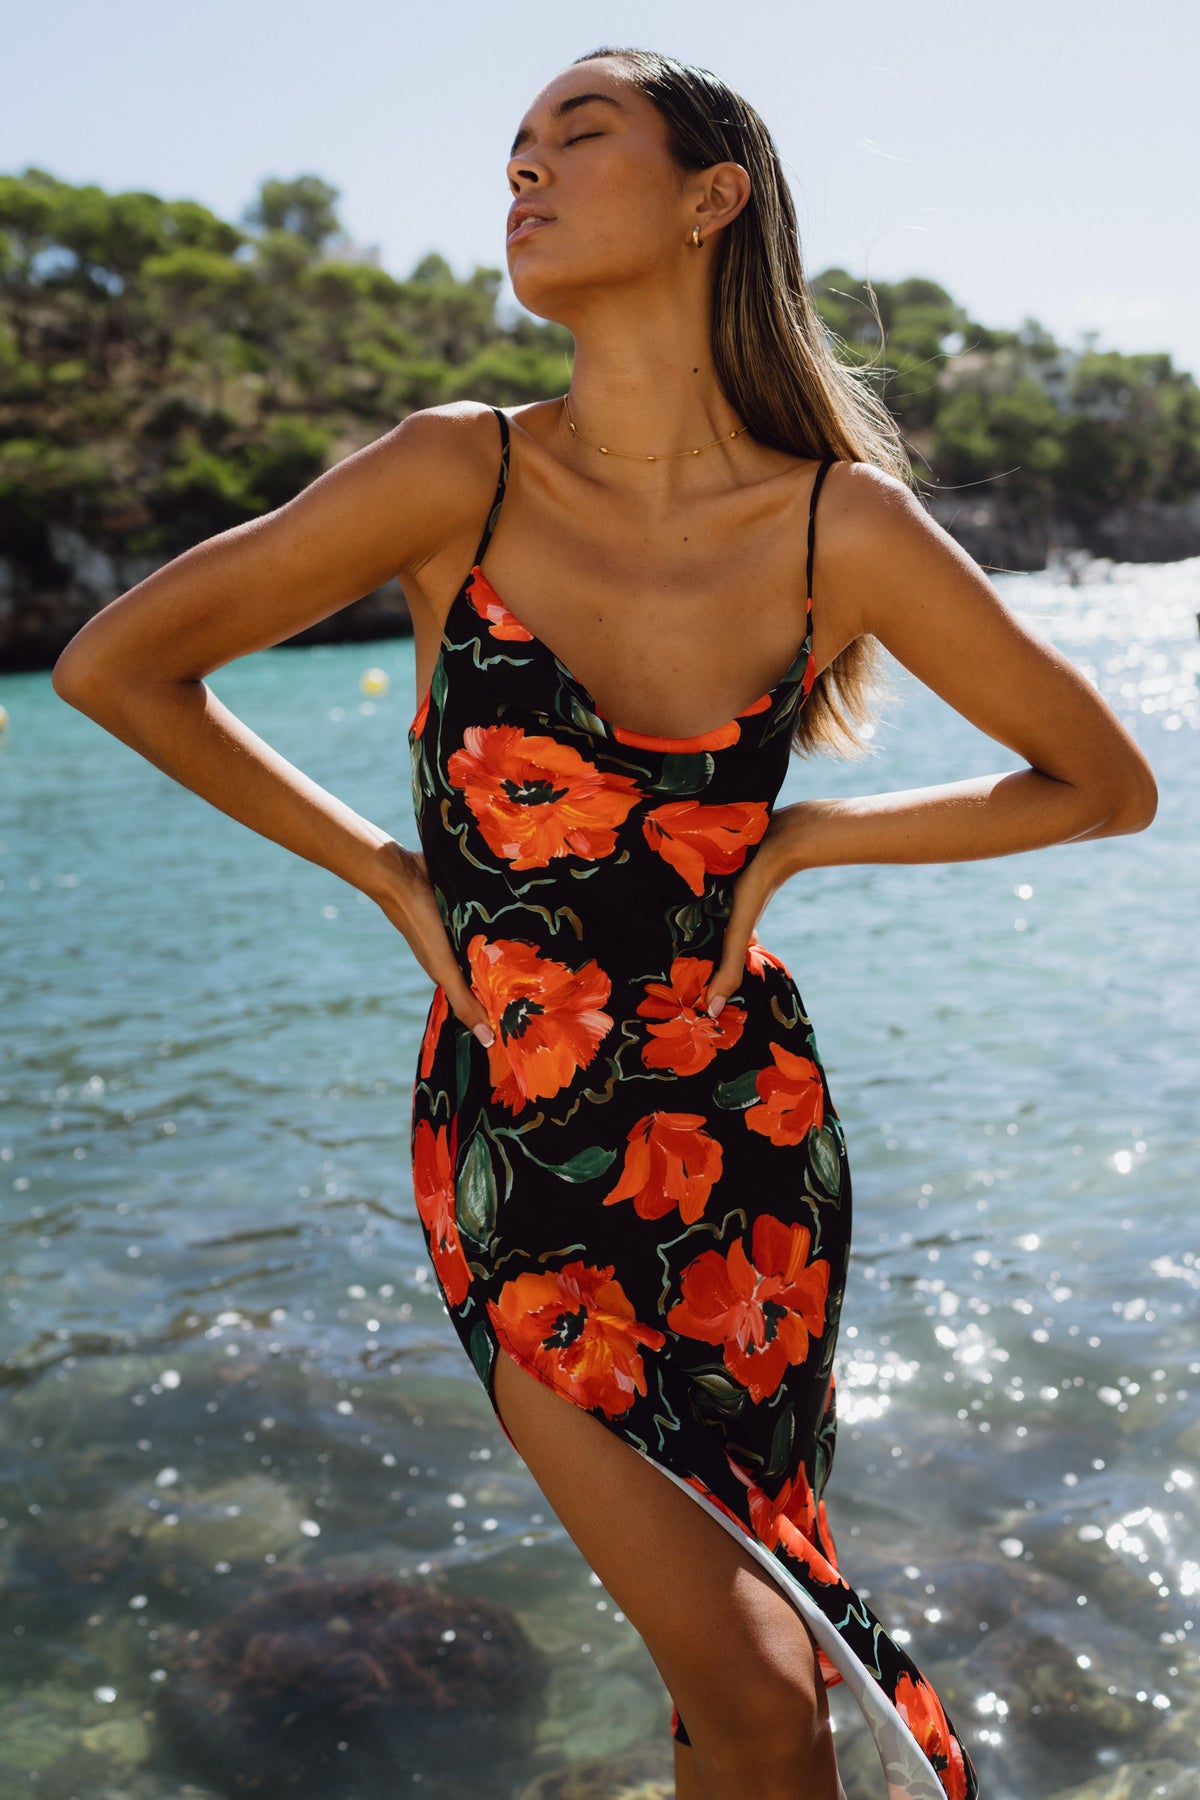 This is an image of Madison Slip in Poppy - RESA featuring a model wearing the dress